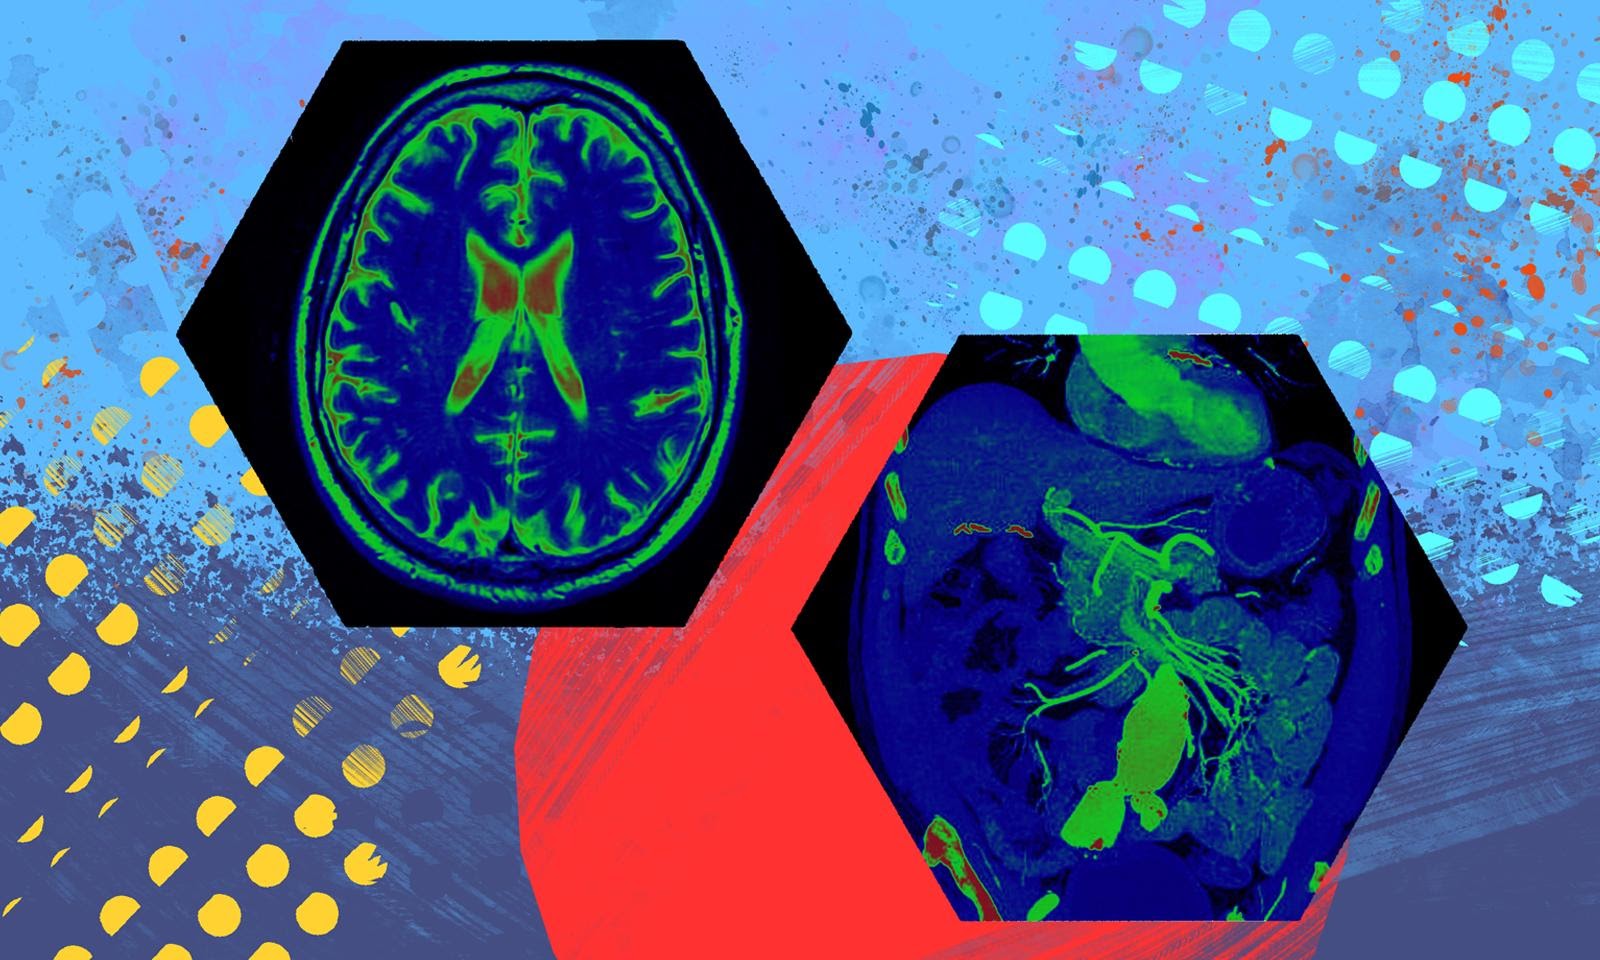 Two x-ray images of the brain on a colorful background.